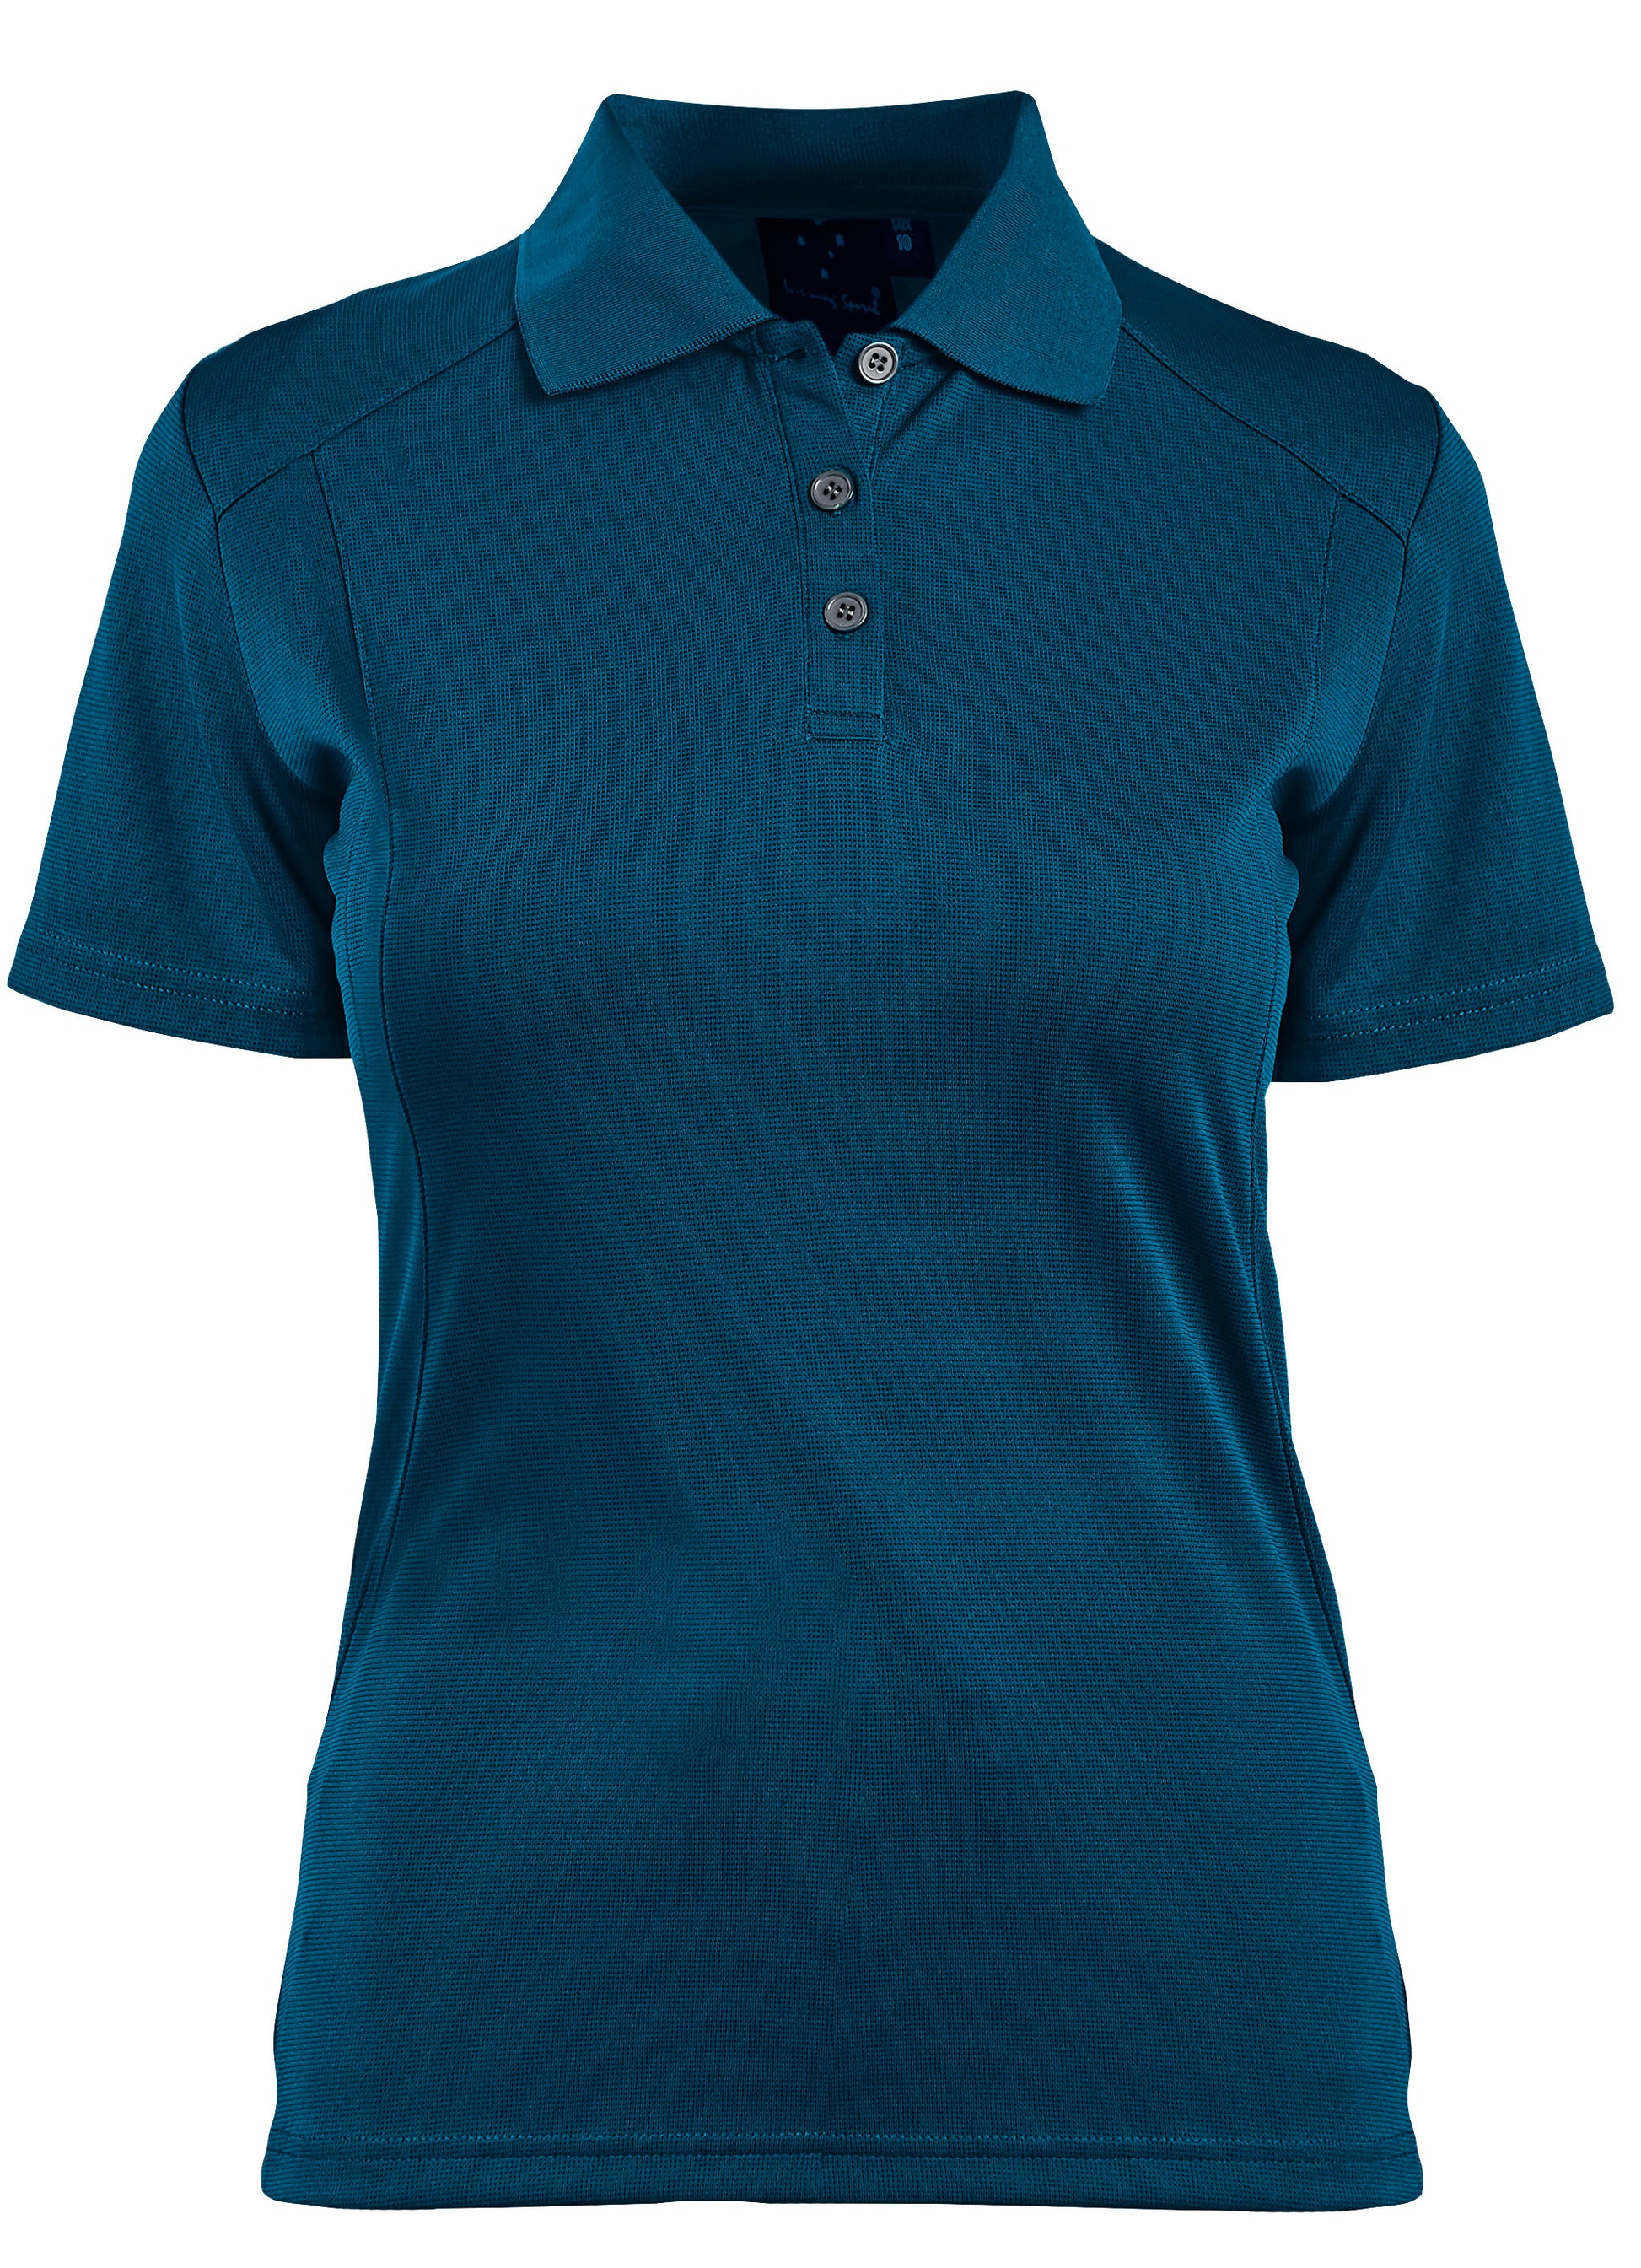 Winning Spirit Ladies' Breathable Bamboo Charcoal Short Sleeve Polo-(PS60)